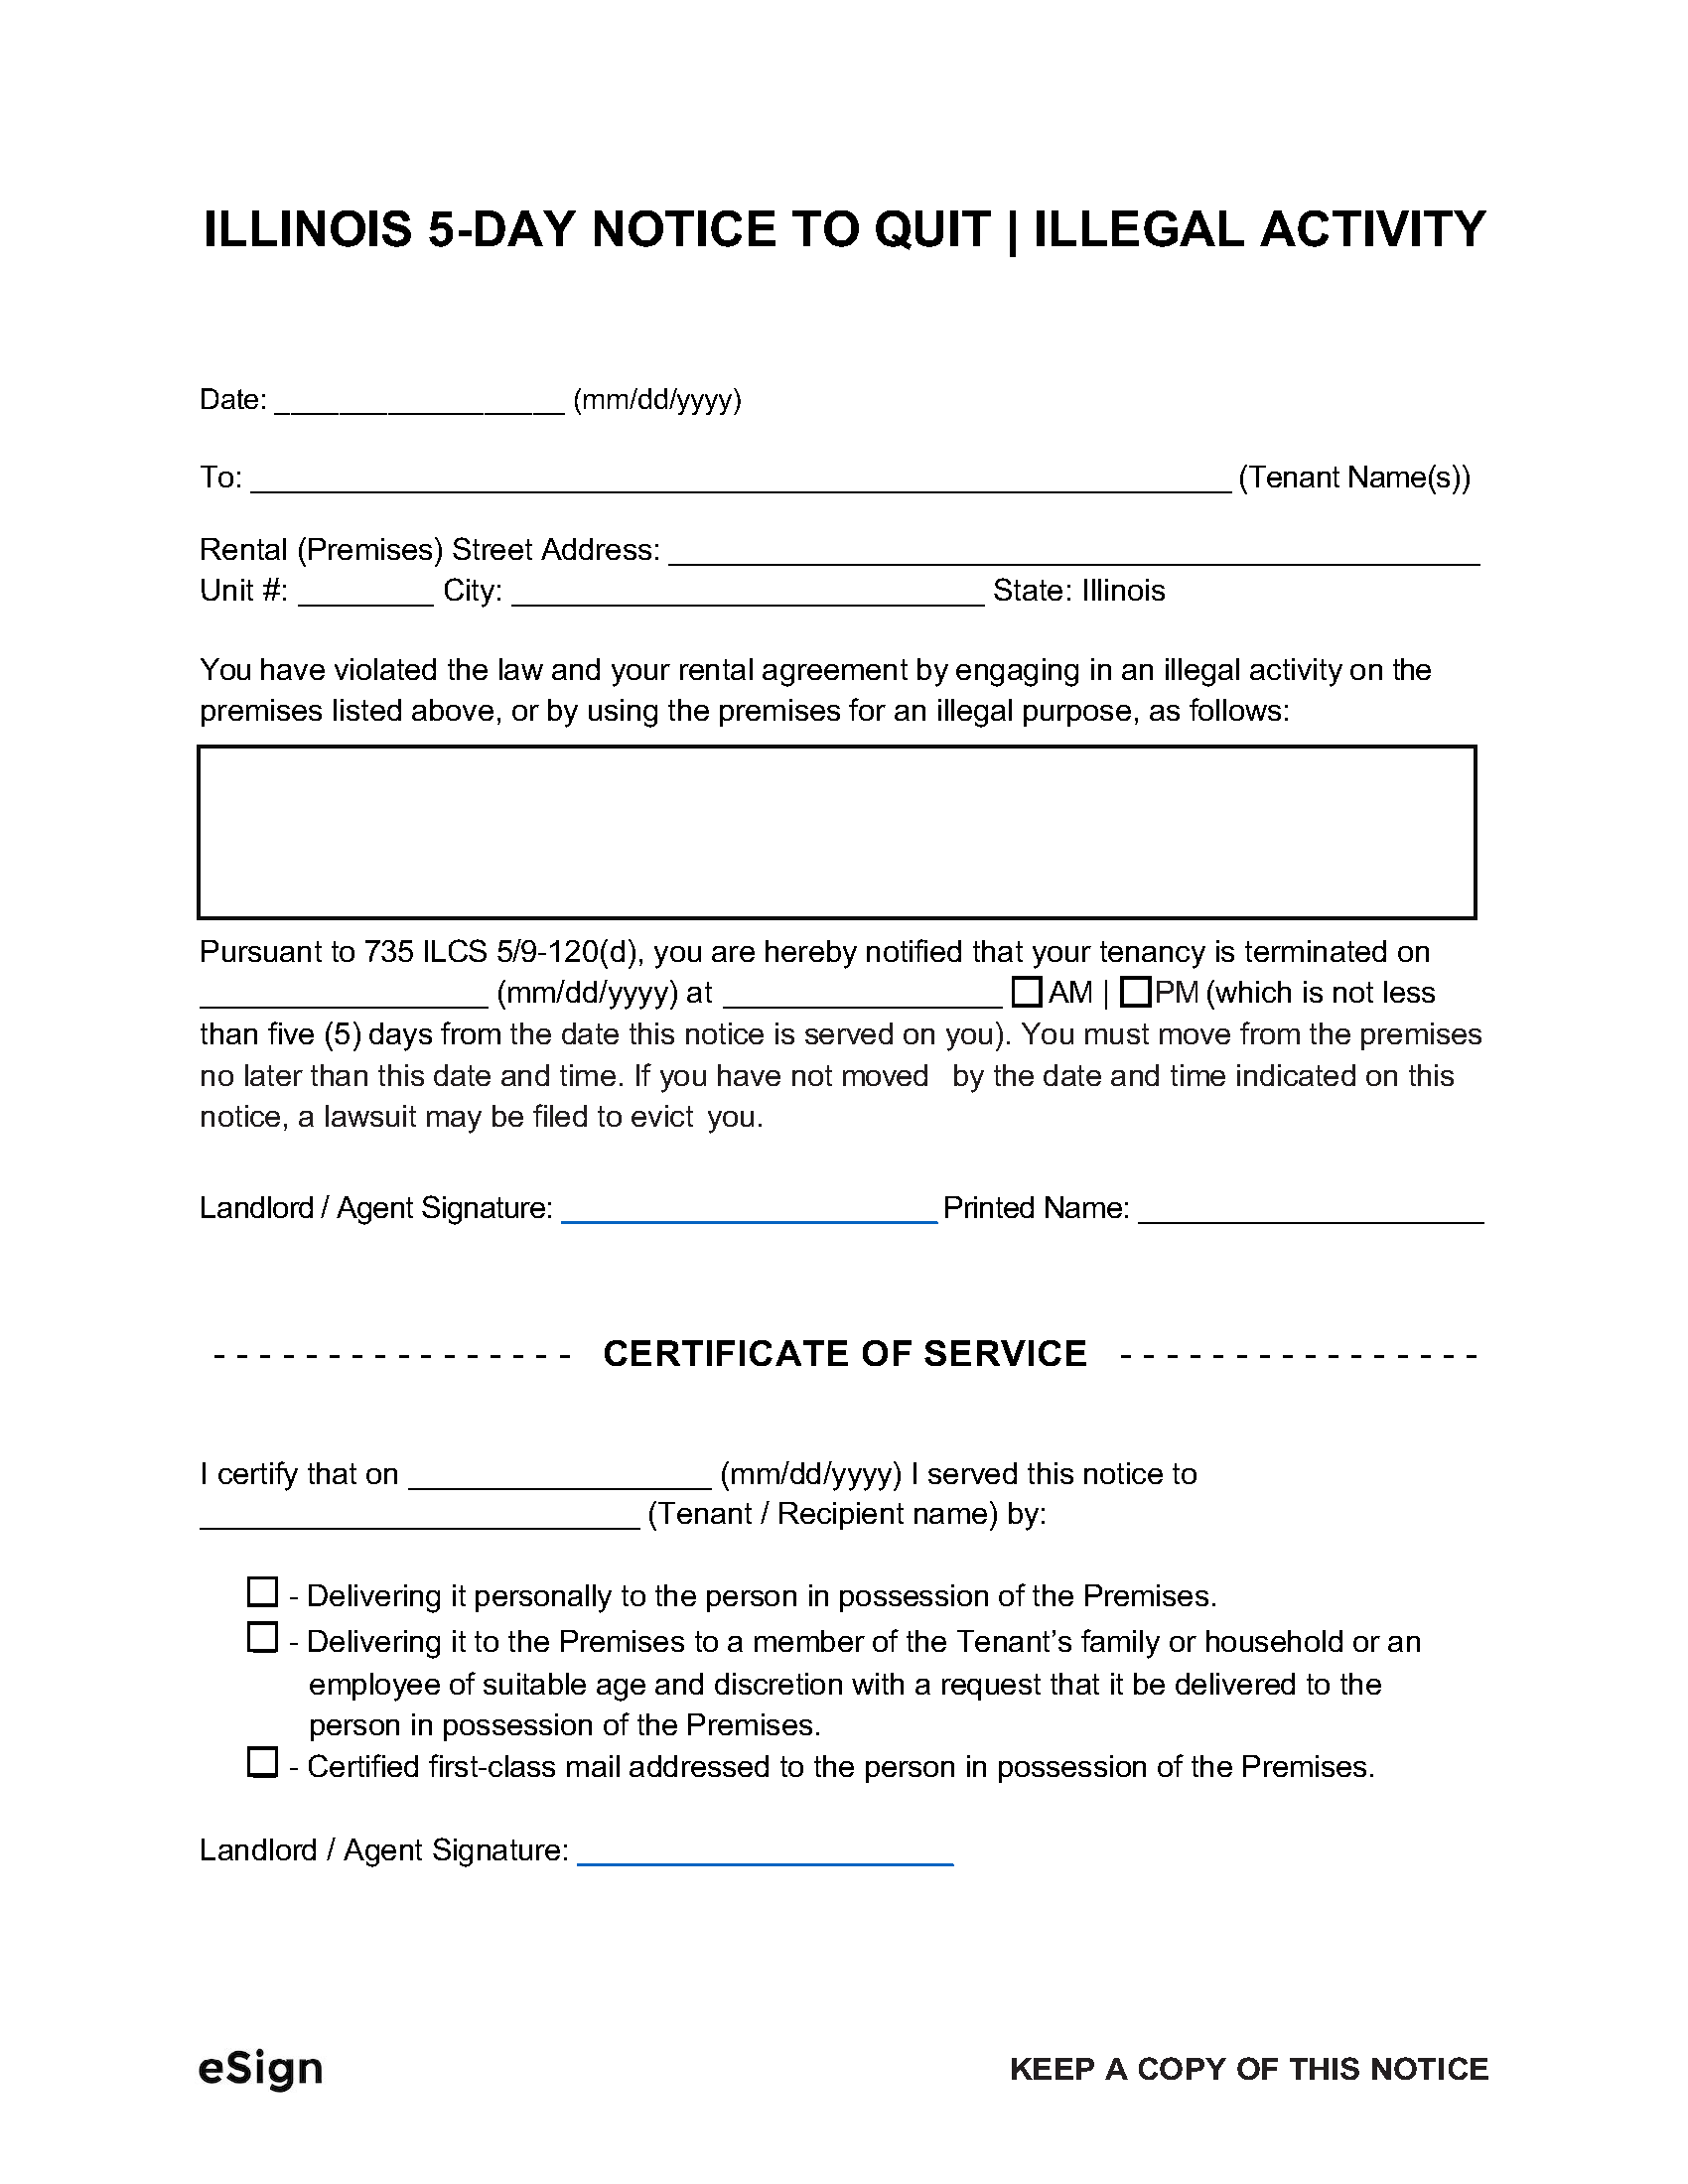 Free Illinois 5 Day Notice To Quit Illegal Activity PDF Word